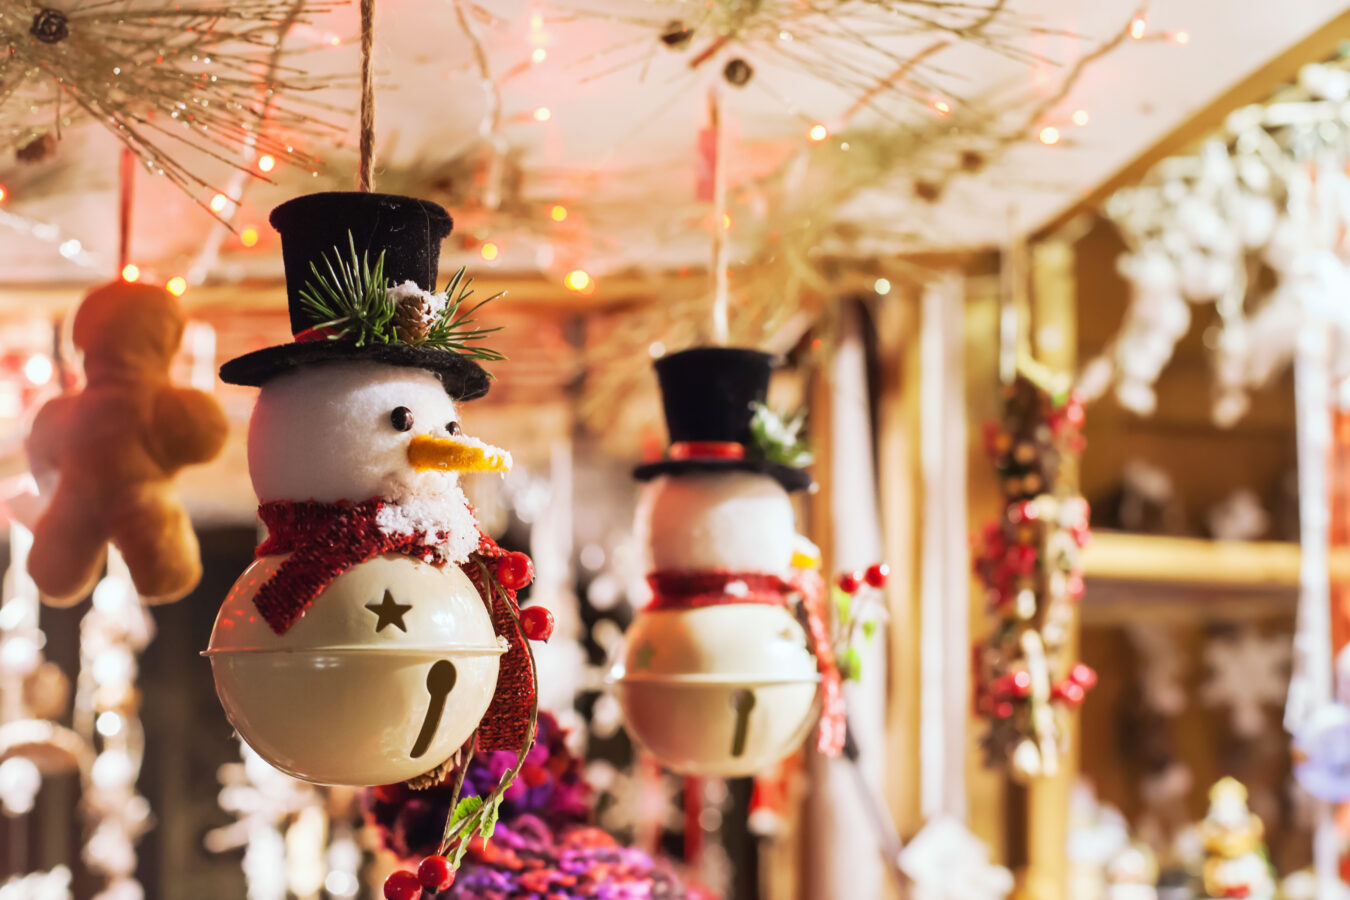 an image showing the snowman on the Christmas market while there is a supply chain crisis.